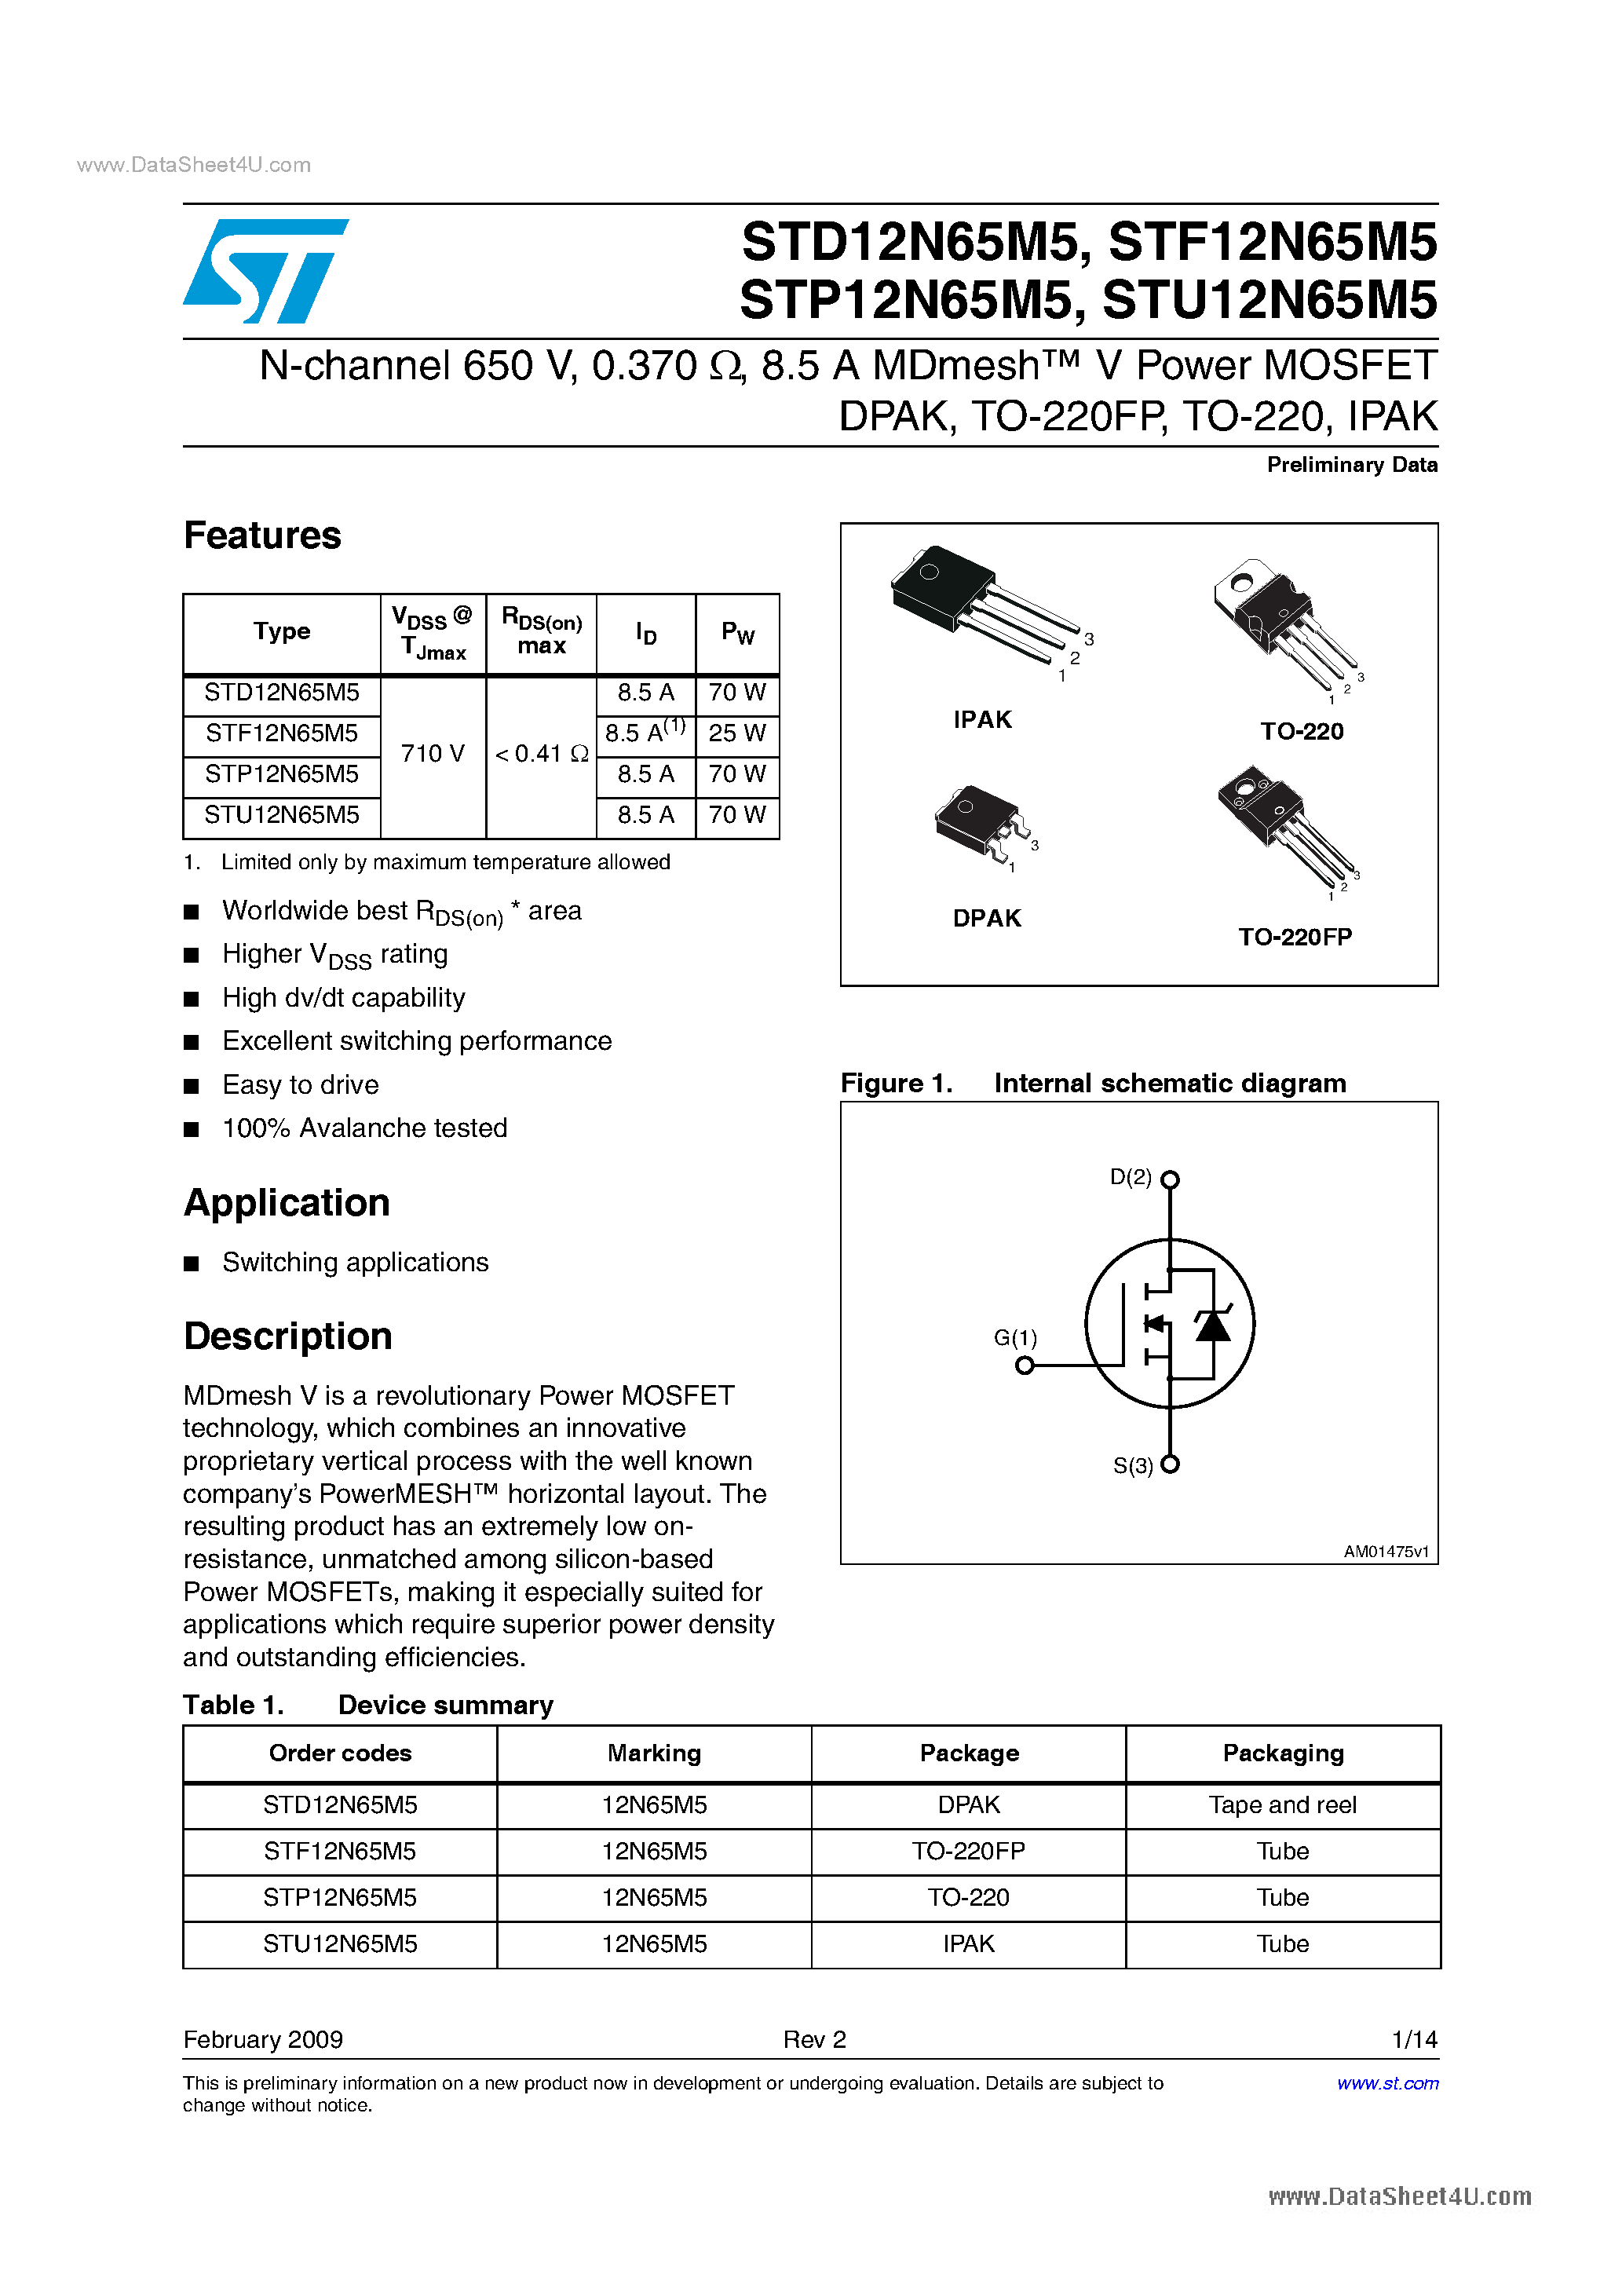 Datasheet STP12N65M5 - Power MOSFETs page 1